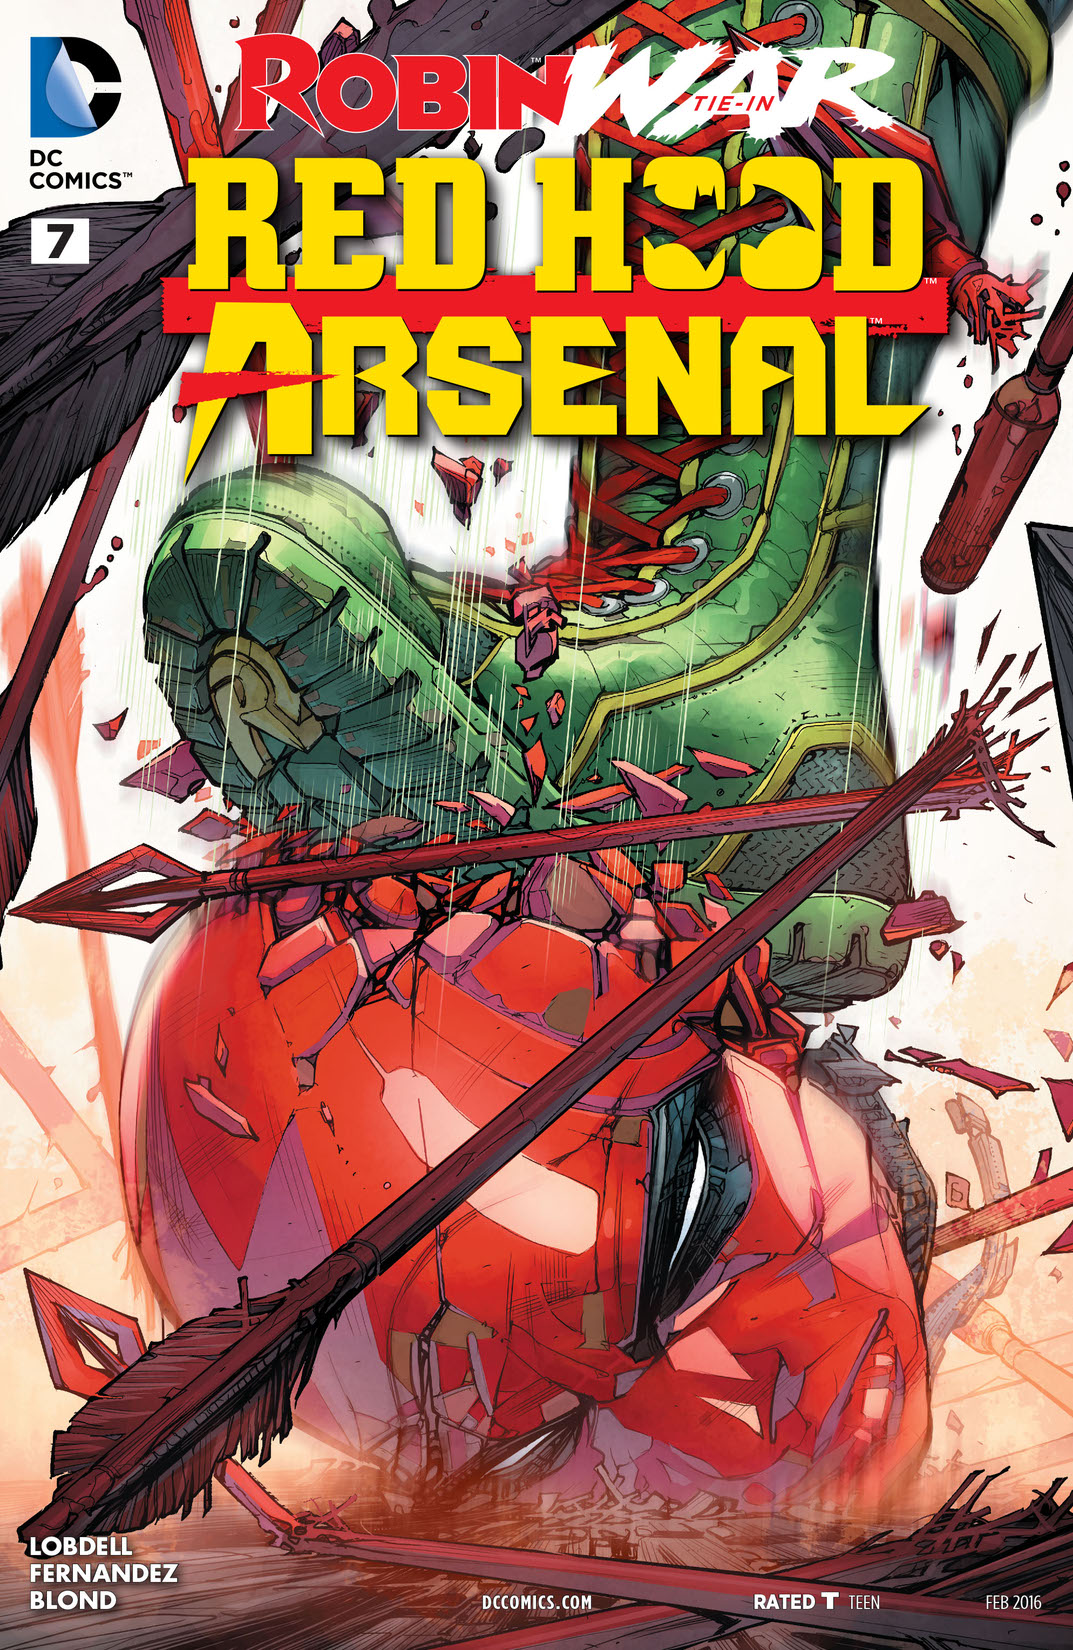 Red Hood/Arsenal #7 preview images